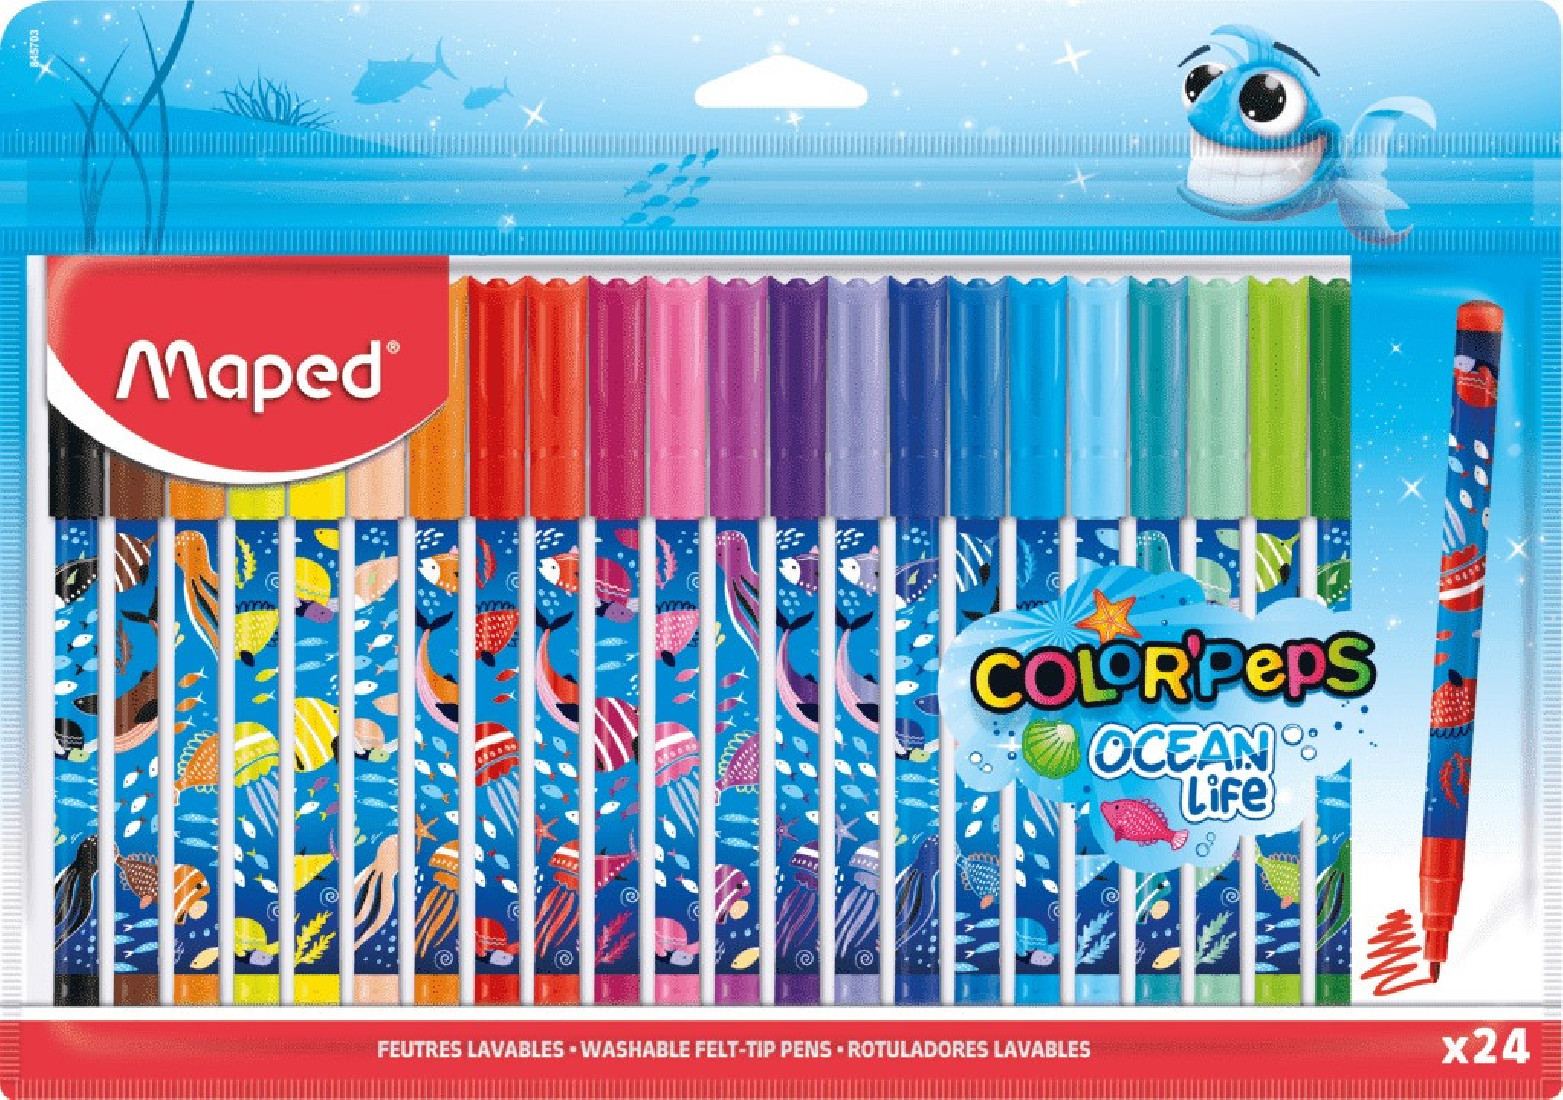 Maped Μαρκαδόροι 24τμχ. Color peps Ocean life 845703